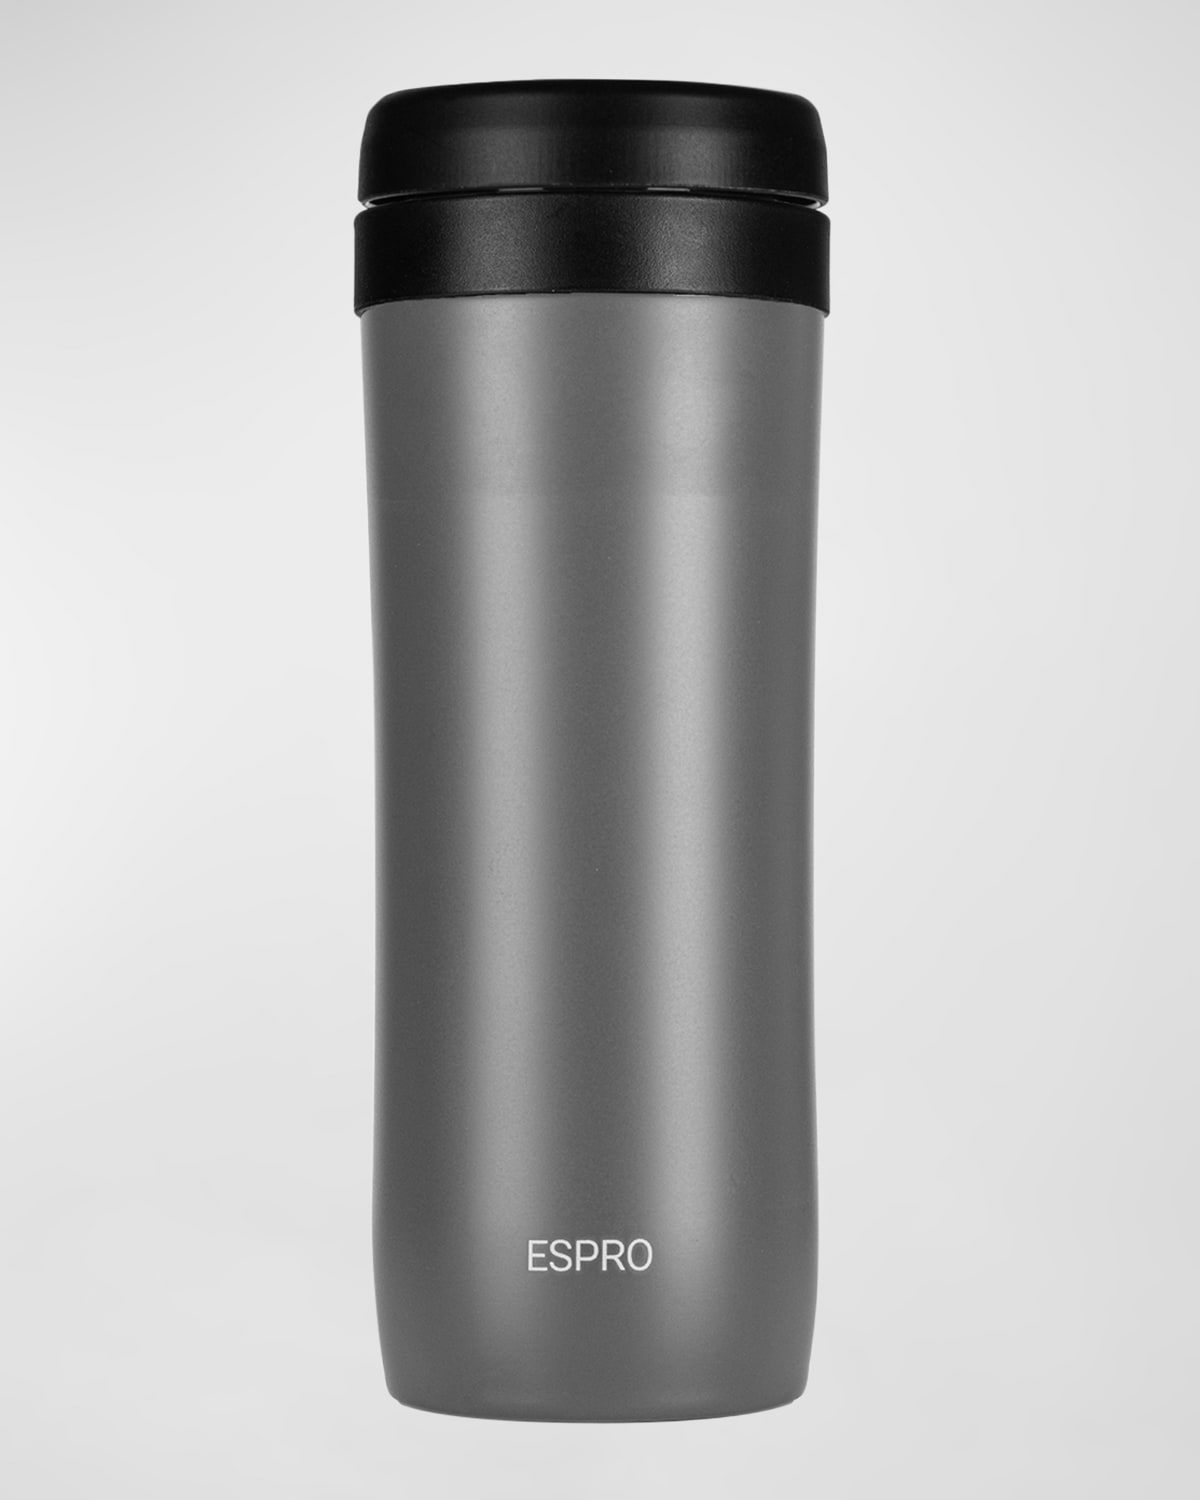 ESPRO TRAVEL PRESS FOR COFFEE FRENCH PRESS,PROD237030419